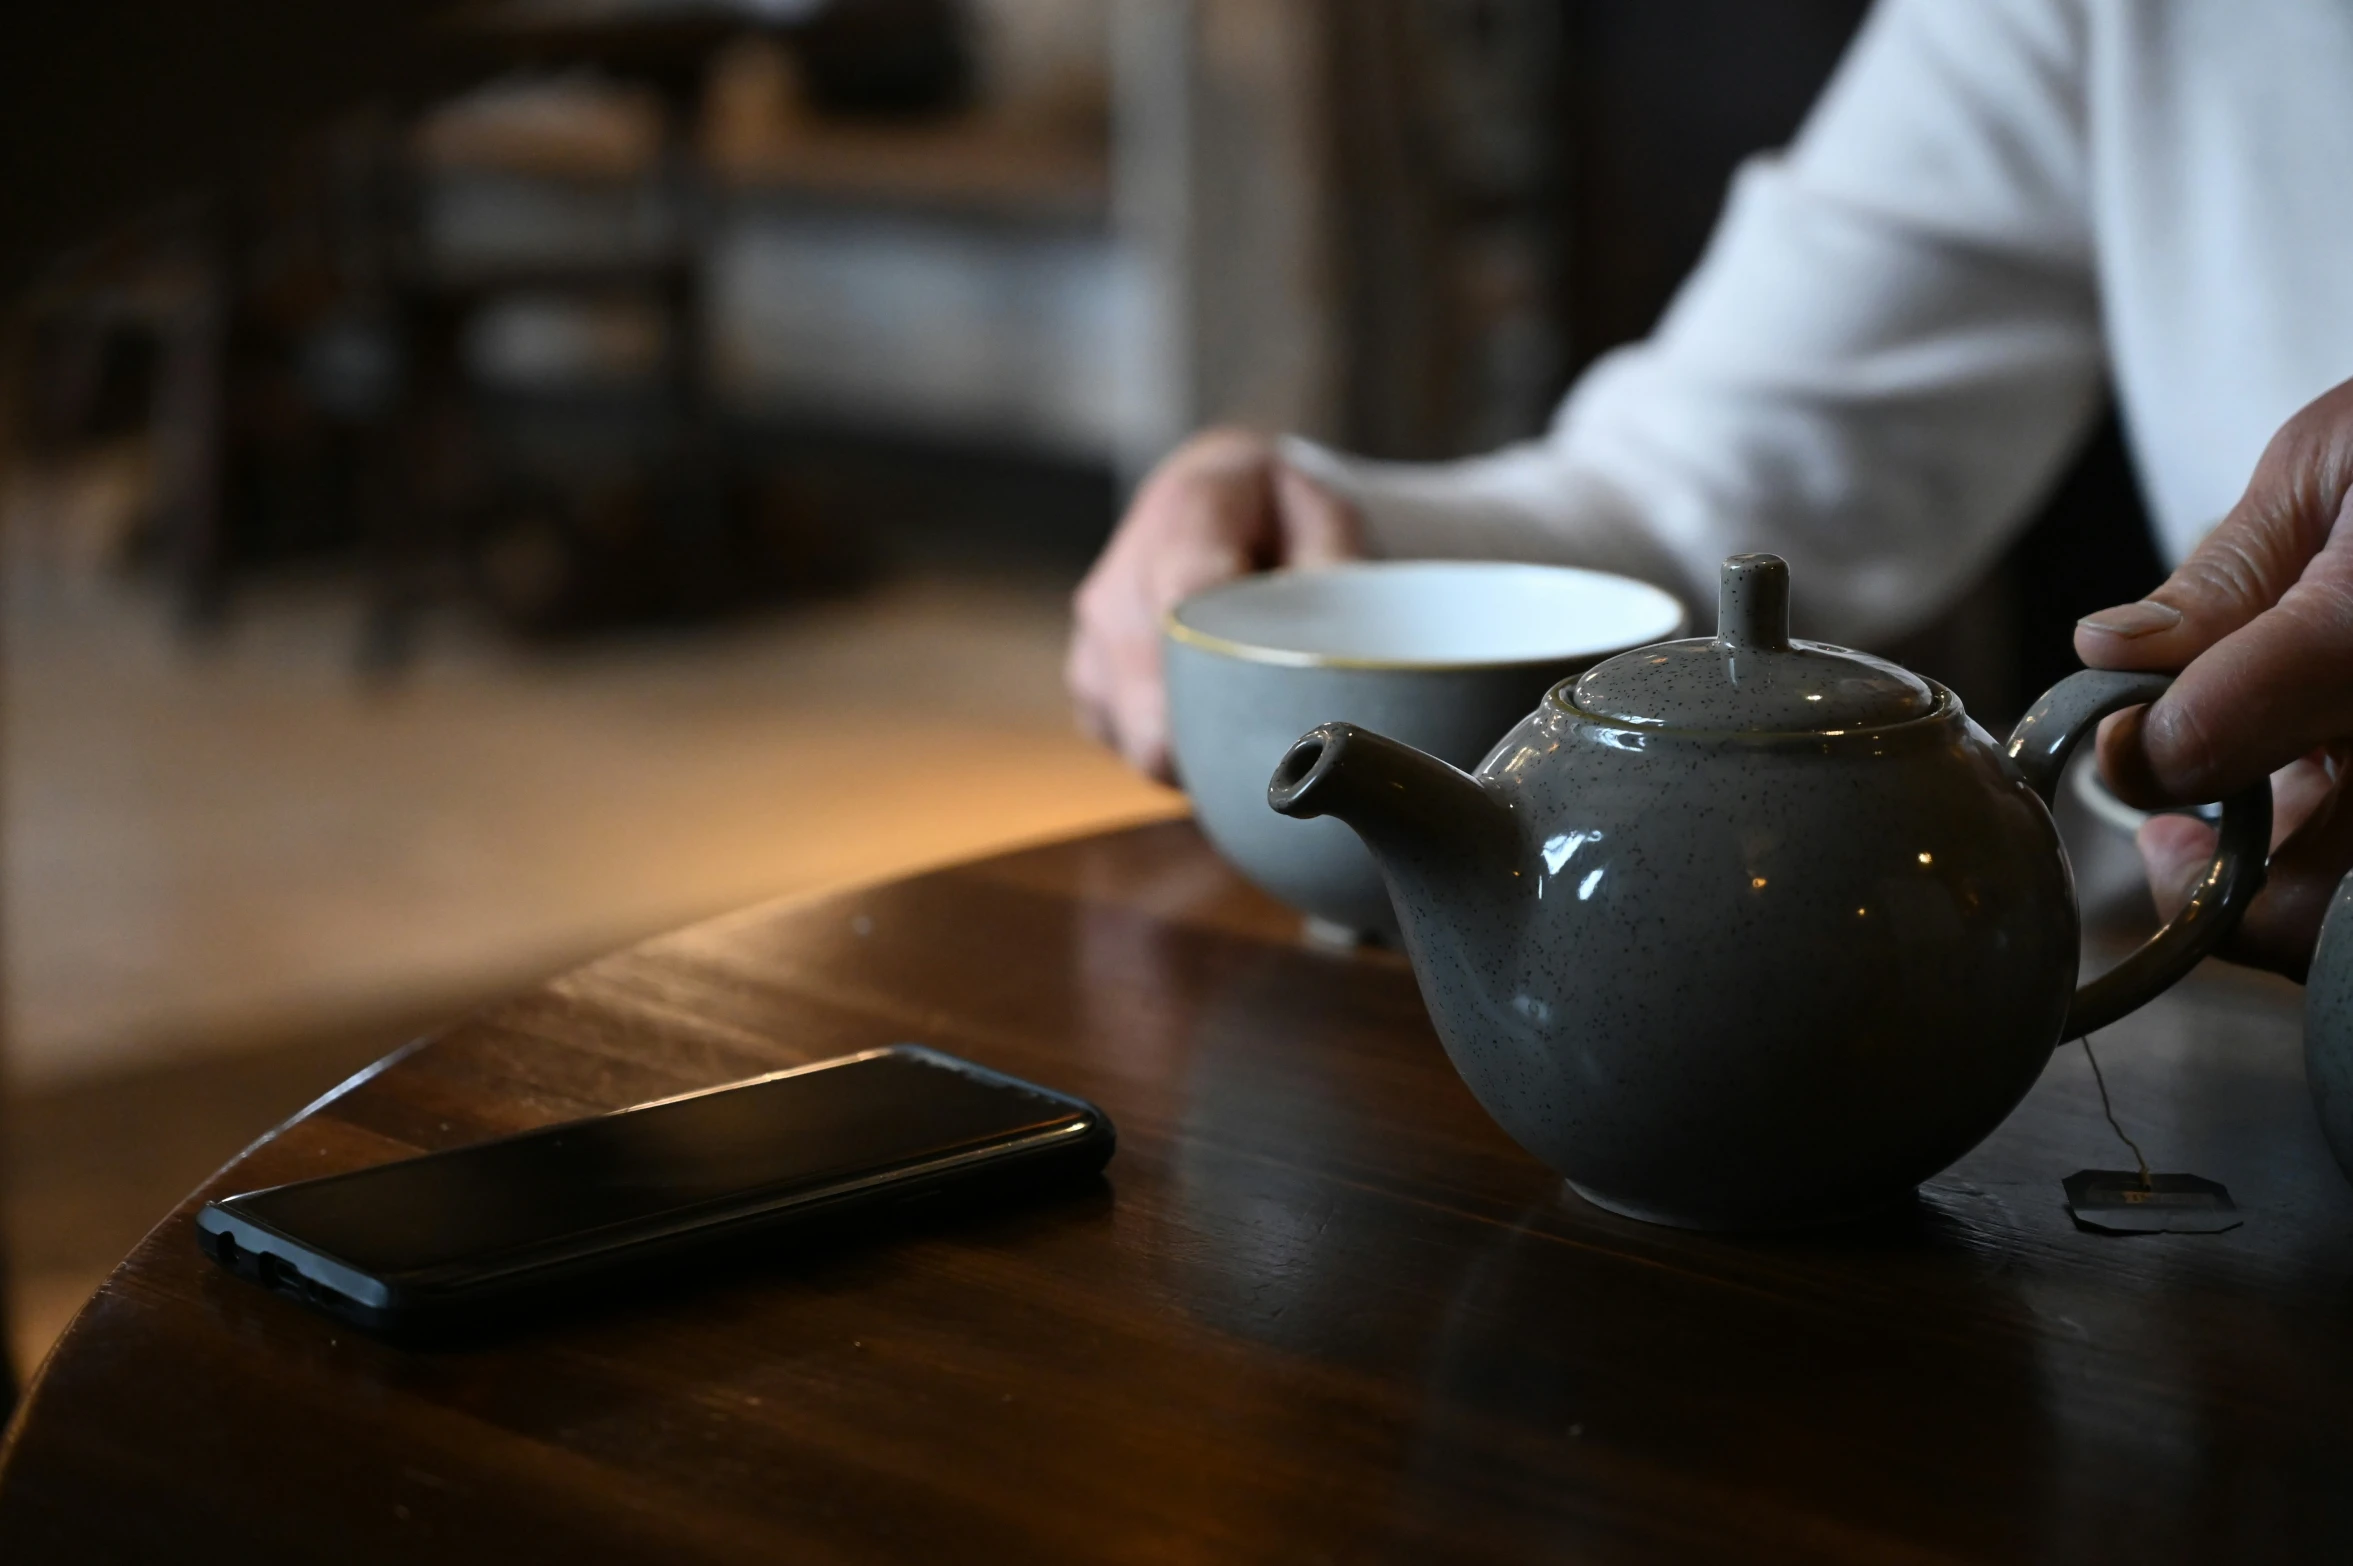 there is a teapot with a silver lid on a wooden table